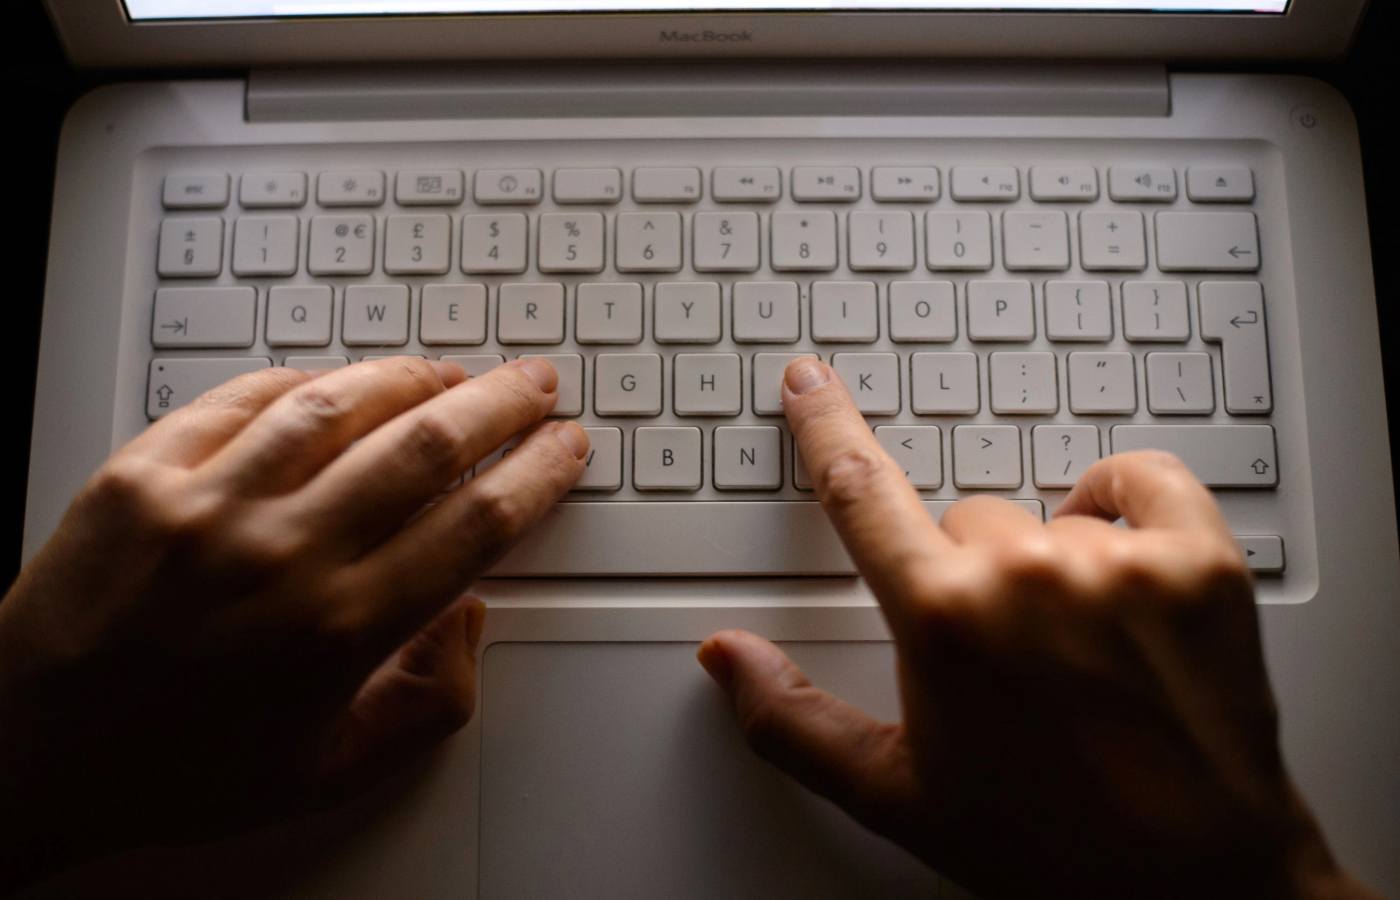 The research suggests 300 million children face some sort of sexual abuse online every year (PA)